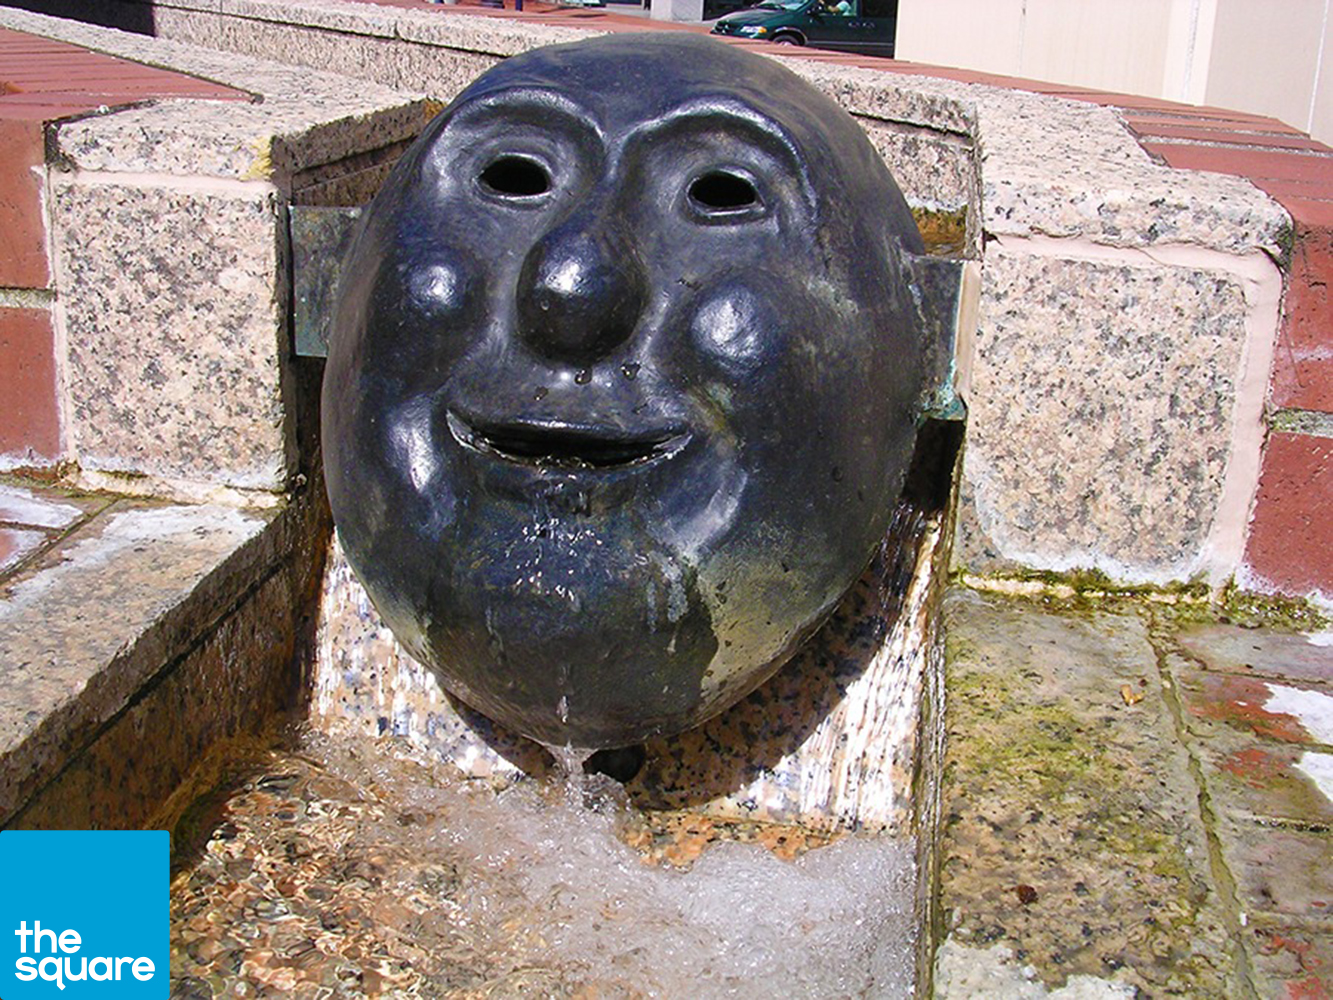 Five bronze cast masks, designed by Will Martin, reside in the water trough surrounding the back patio of Starbucks.